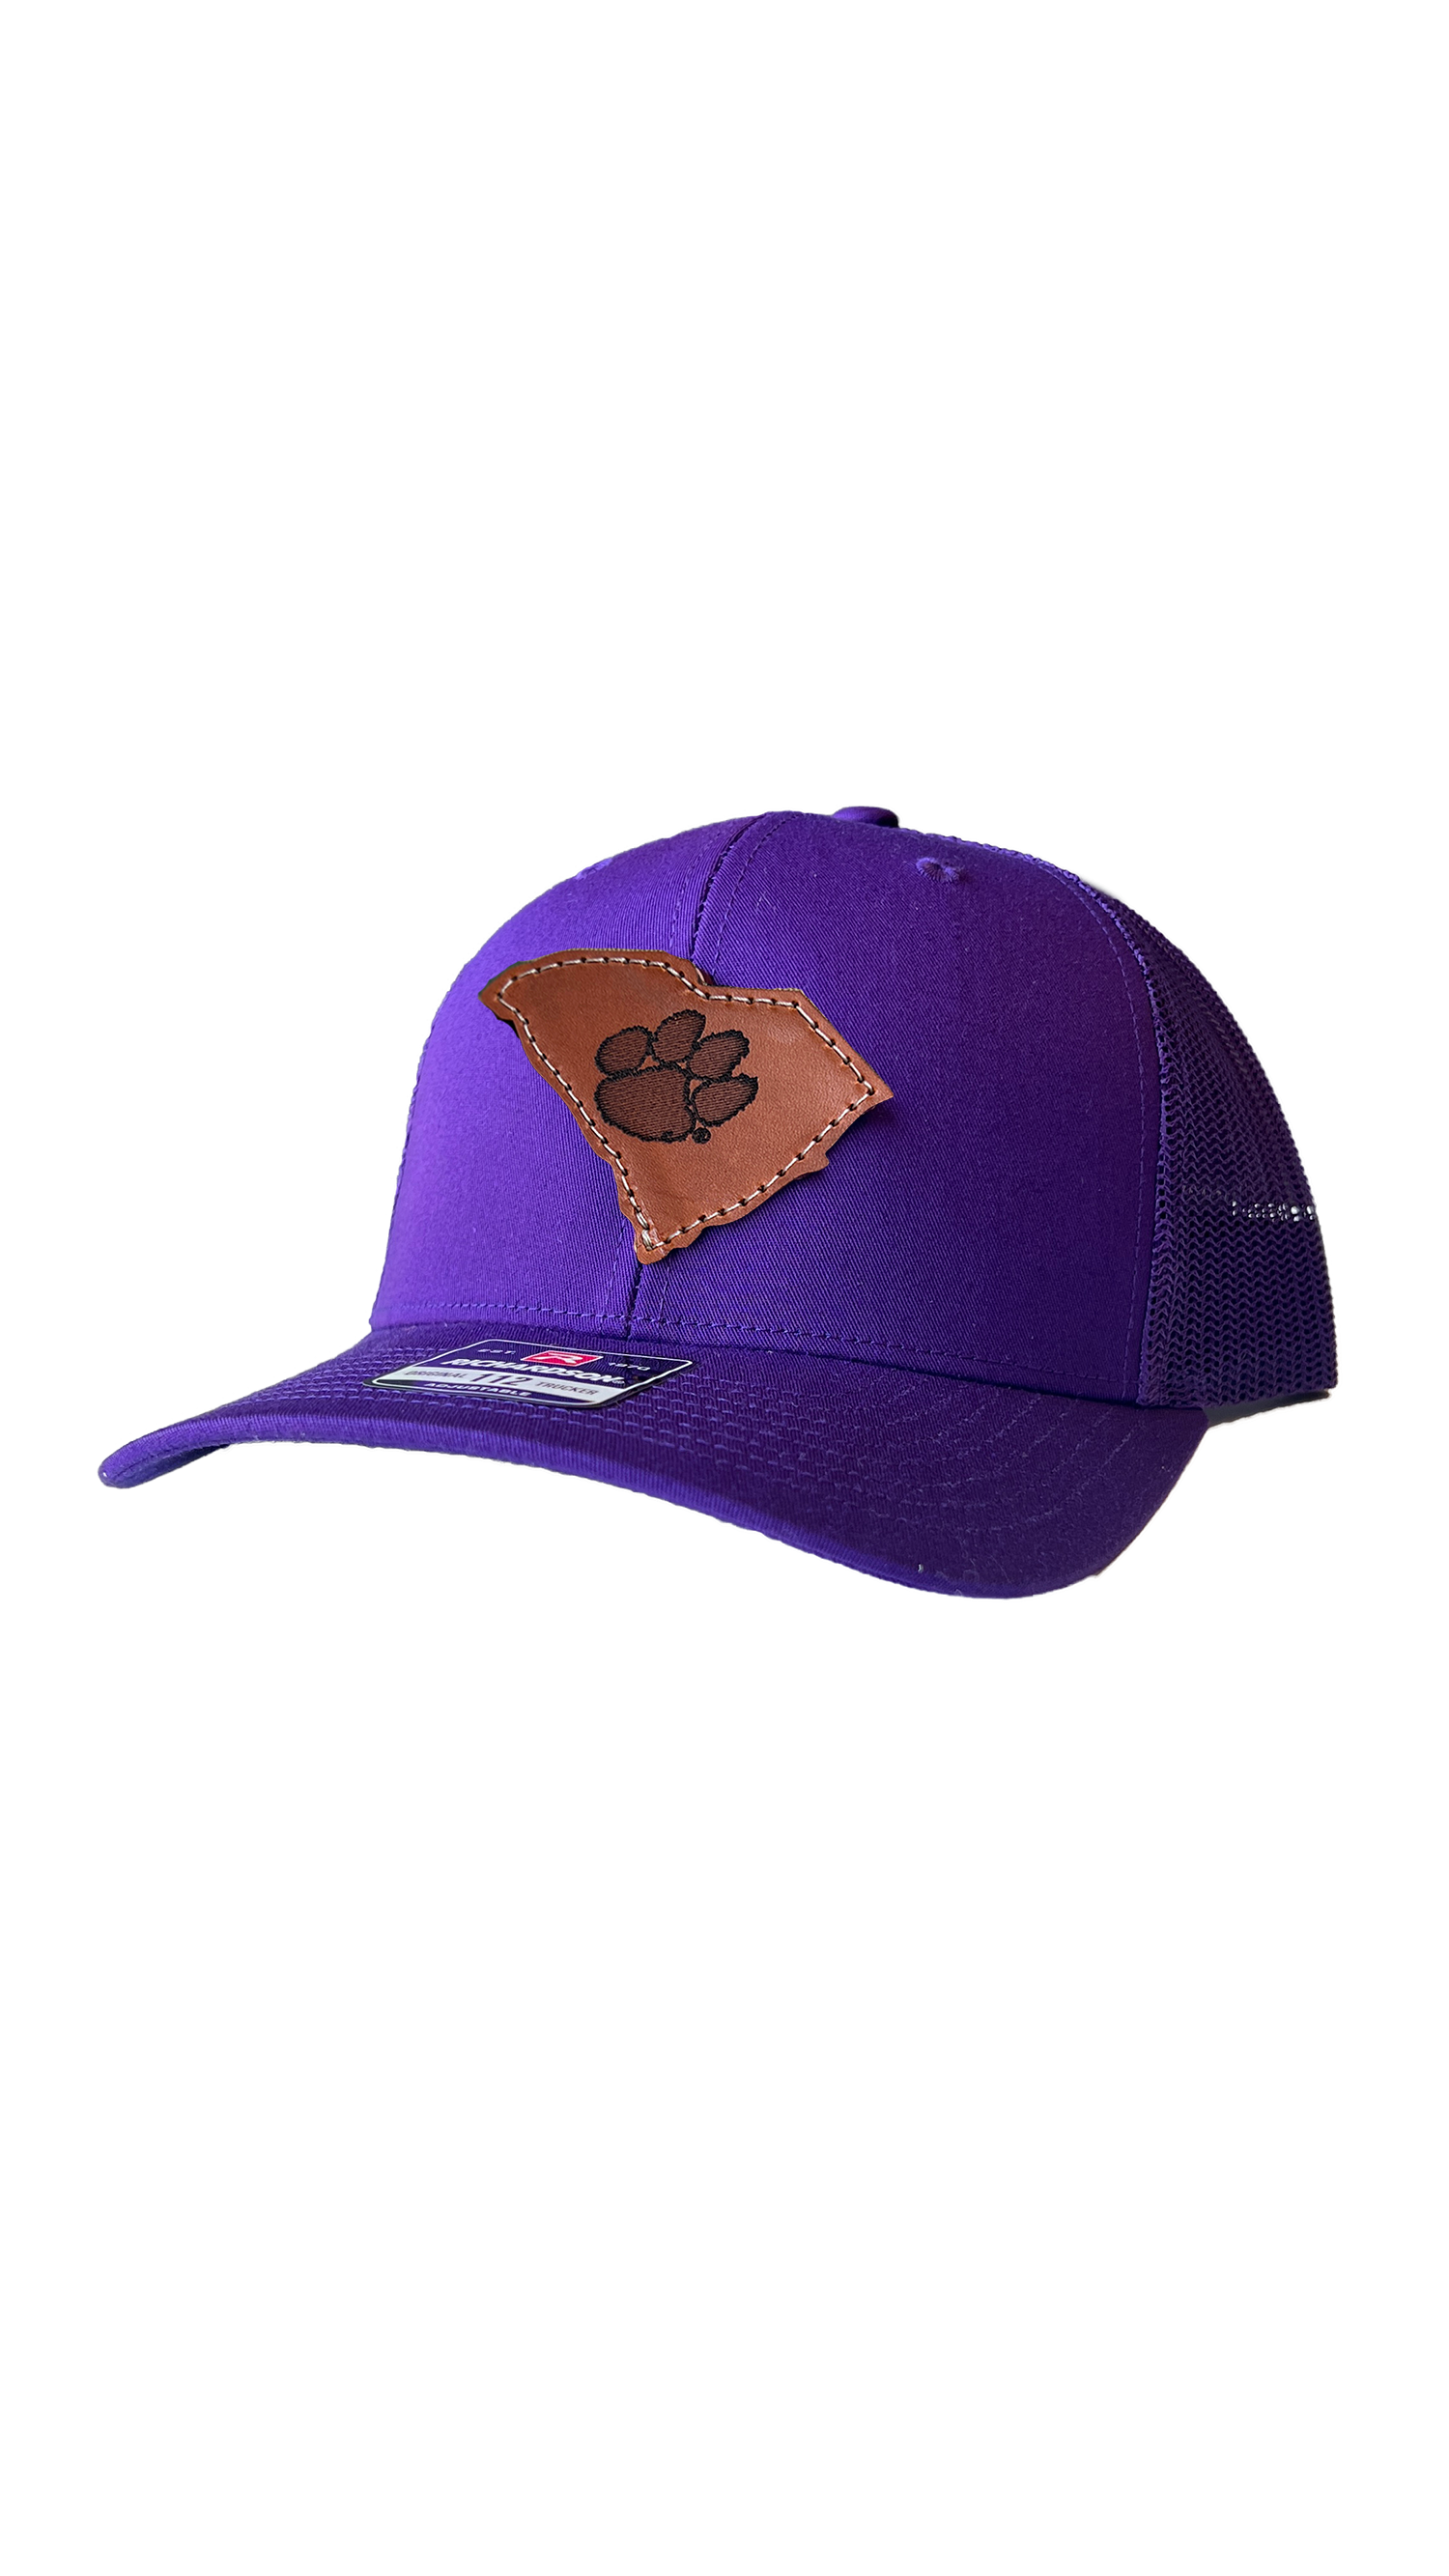 Clemson Tigers Leather South Carolina Patch Trucker Hat-(State Tiger Paw) Purple